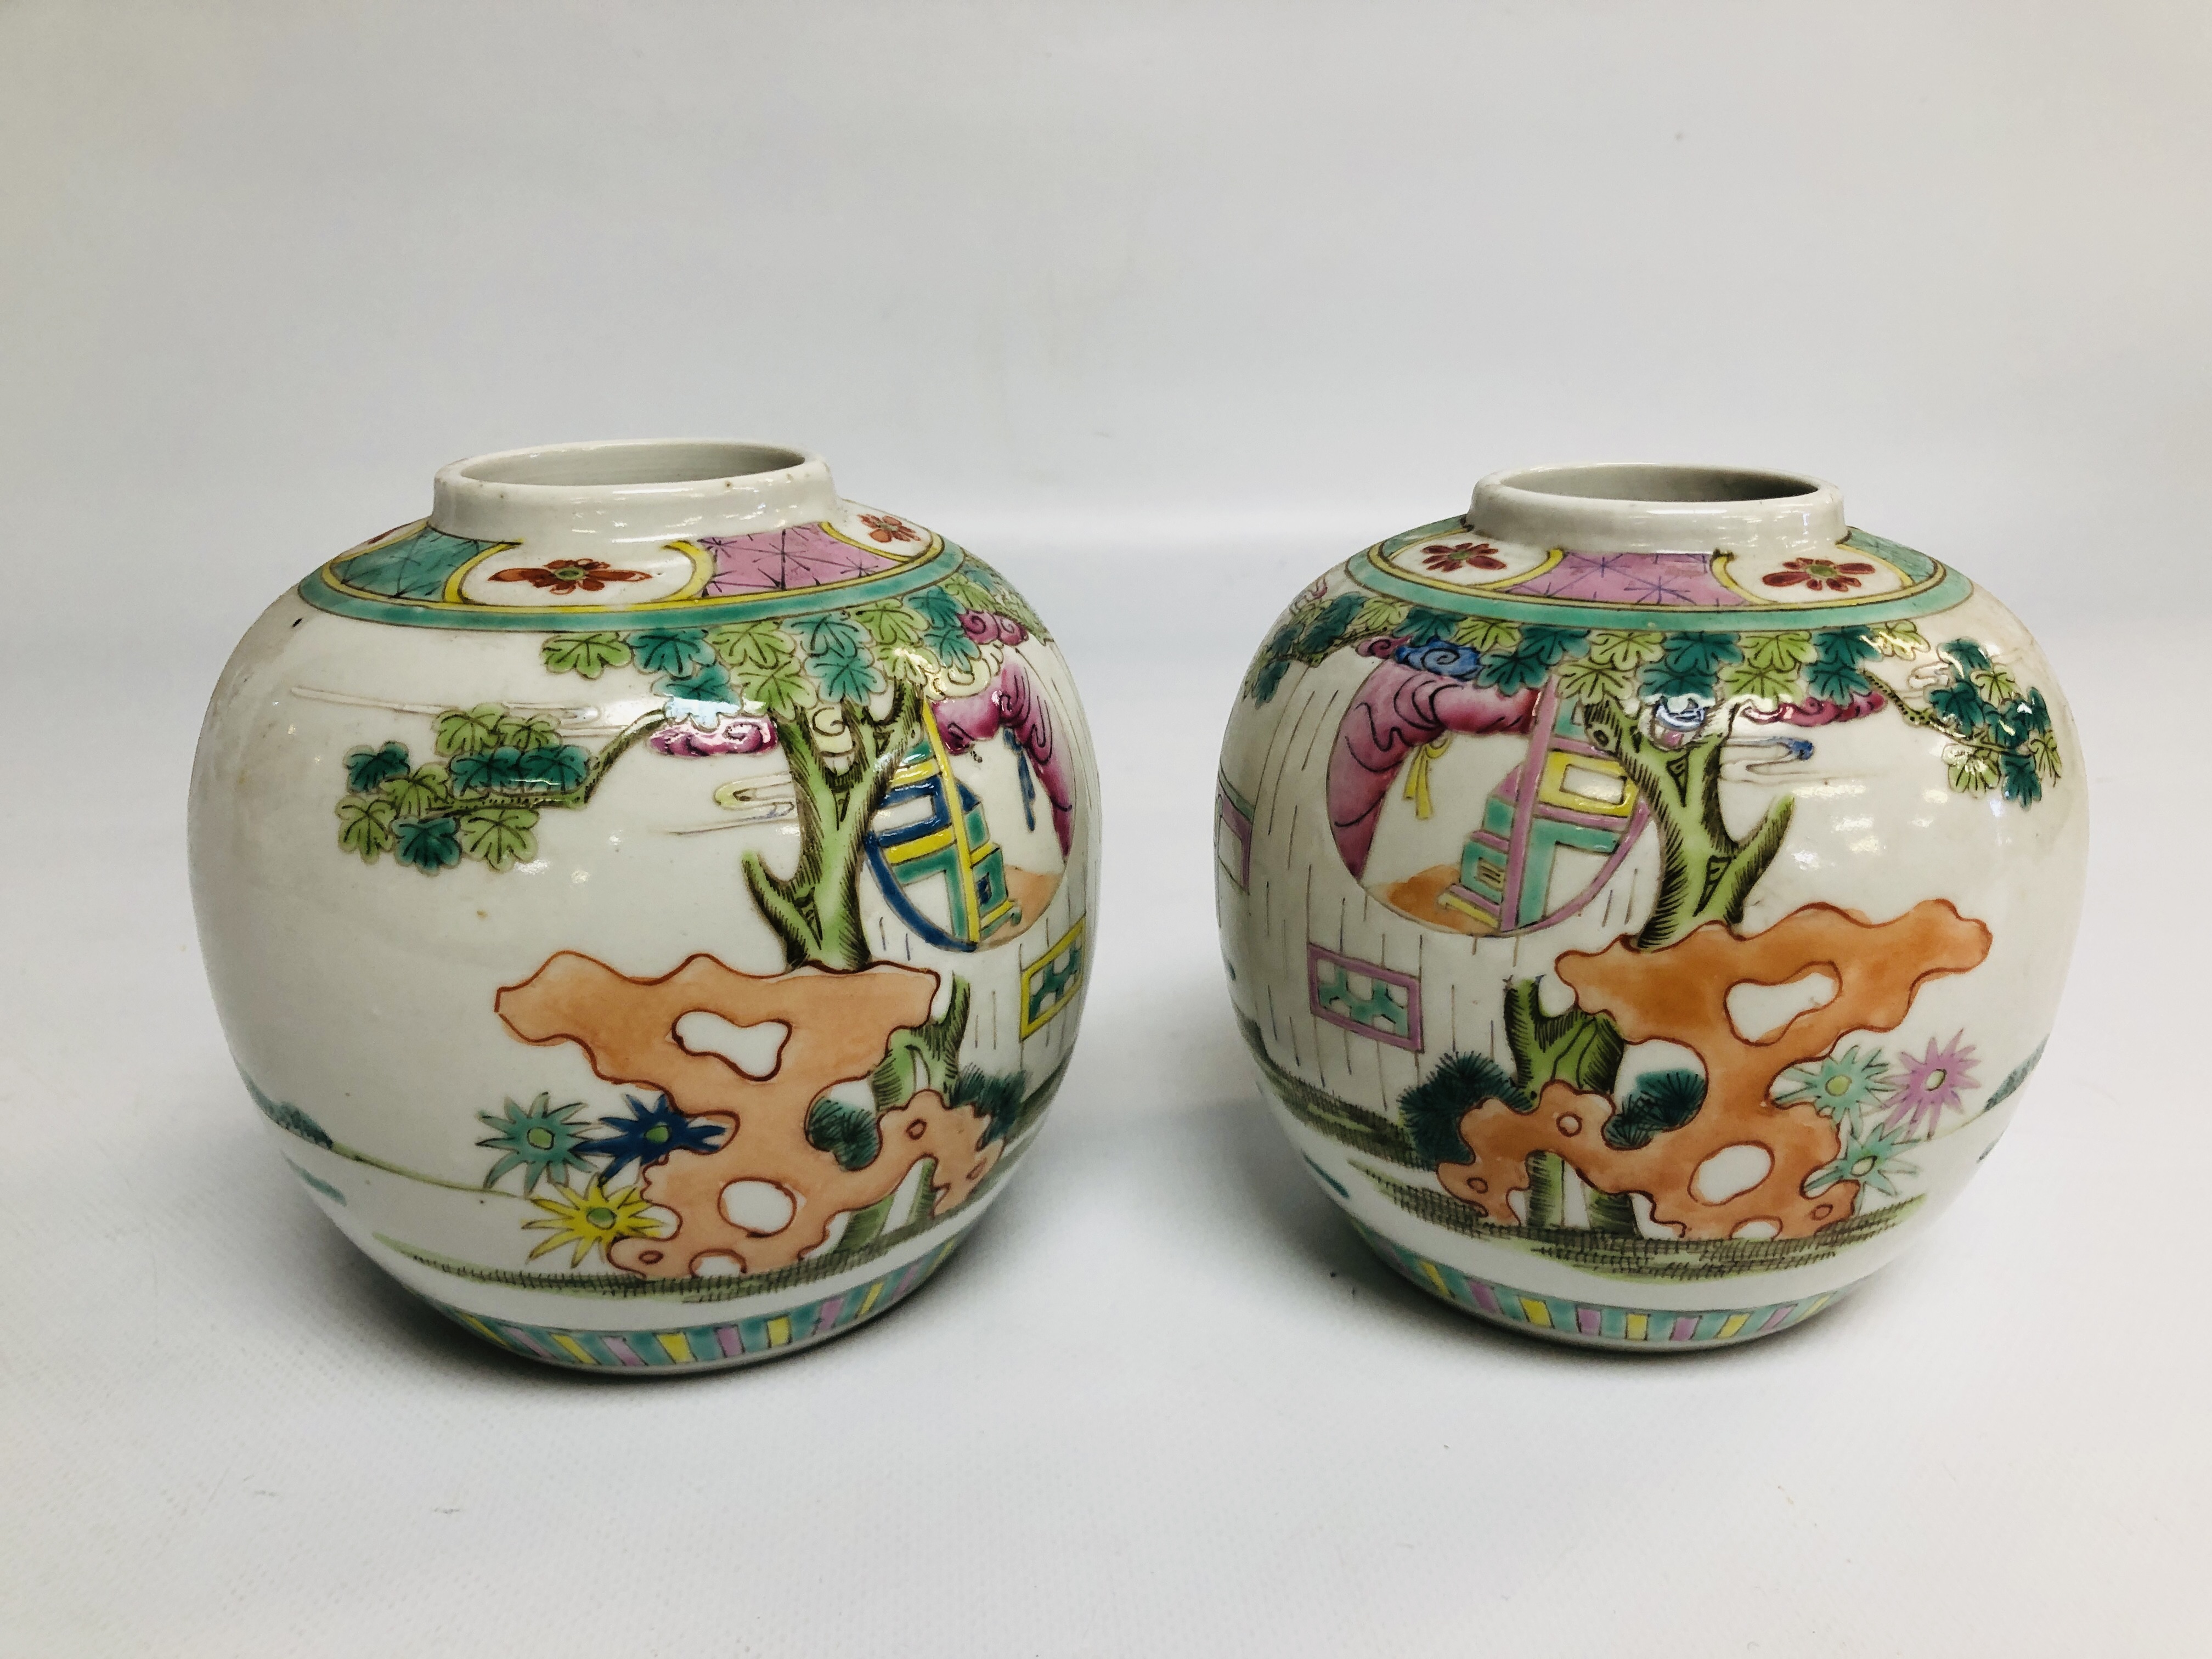 A PAIR OF C19th CHINESE POLYCHROME GINGER JARS, HEIGHT 12.5CM. - Image 5 of 7